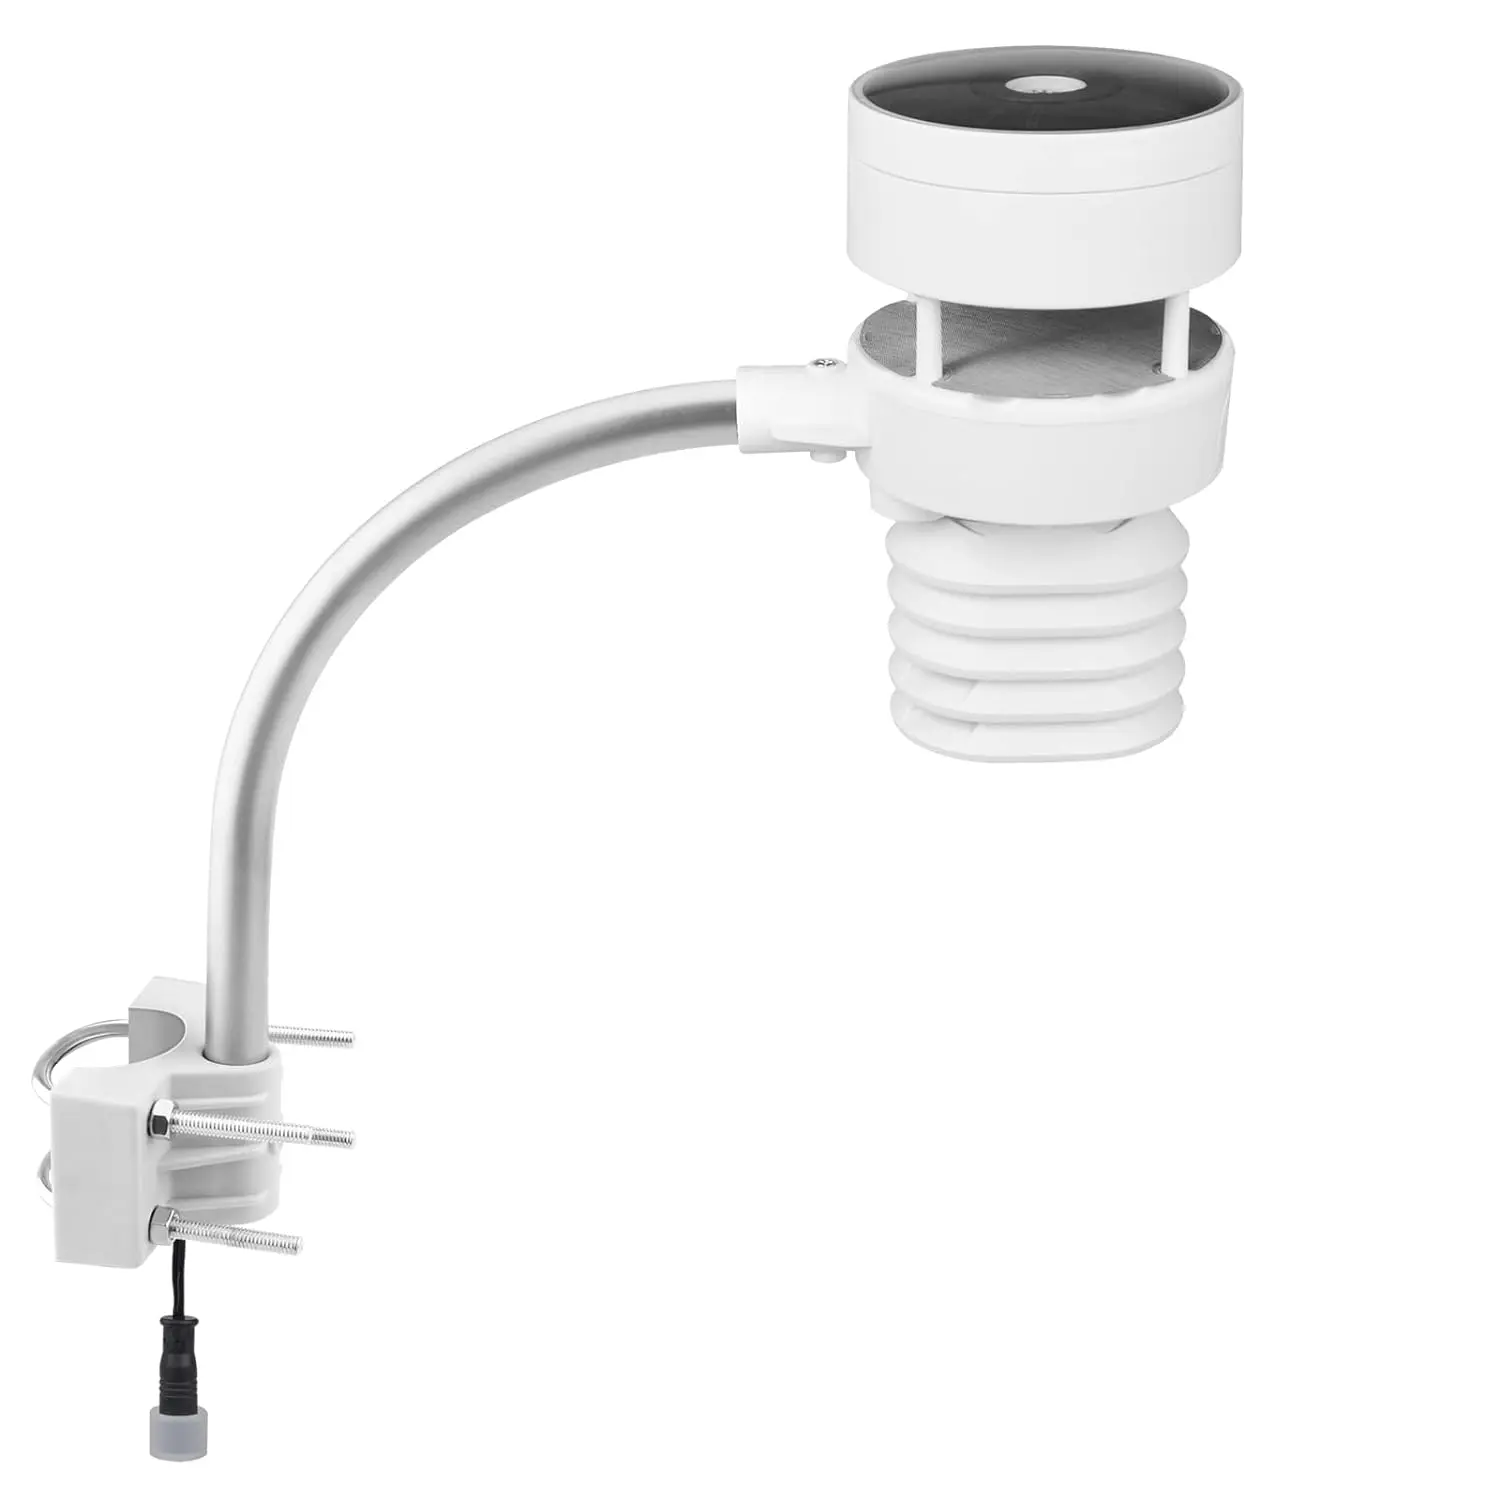 WittBoy : The All-in-one Intelligent Weather Station by Ecowitt